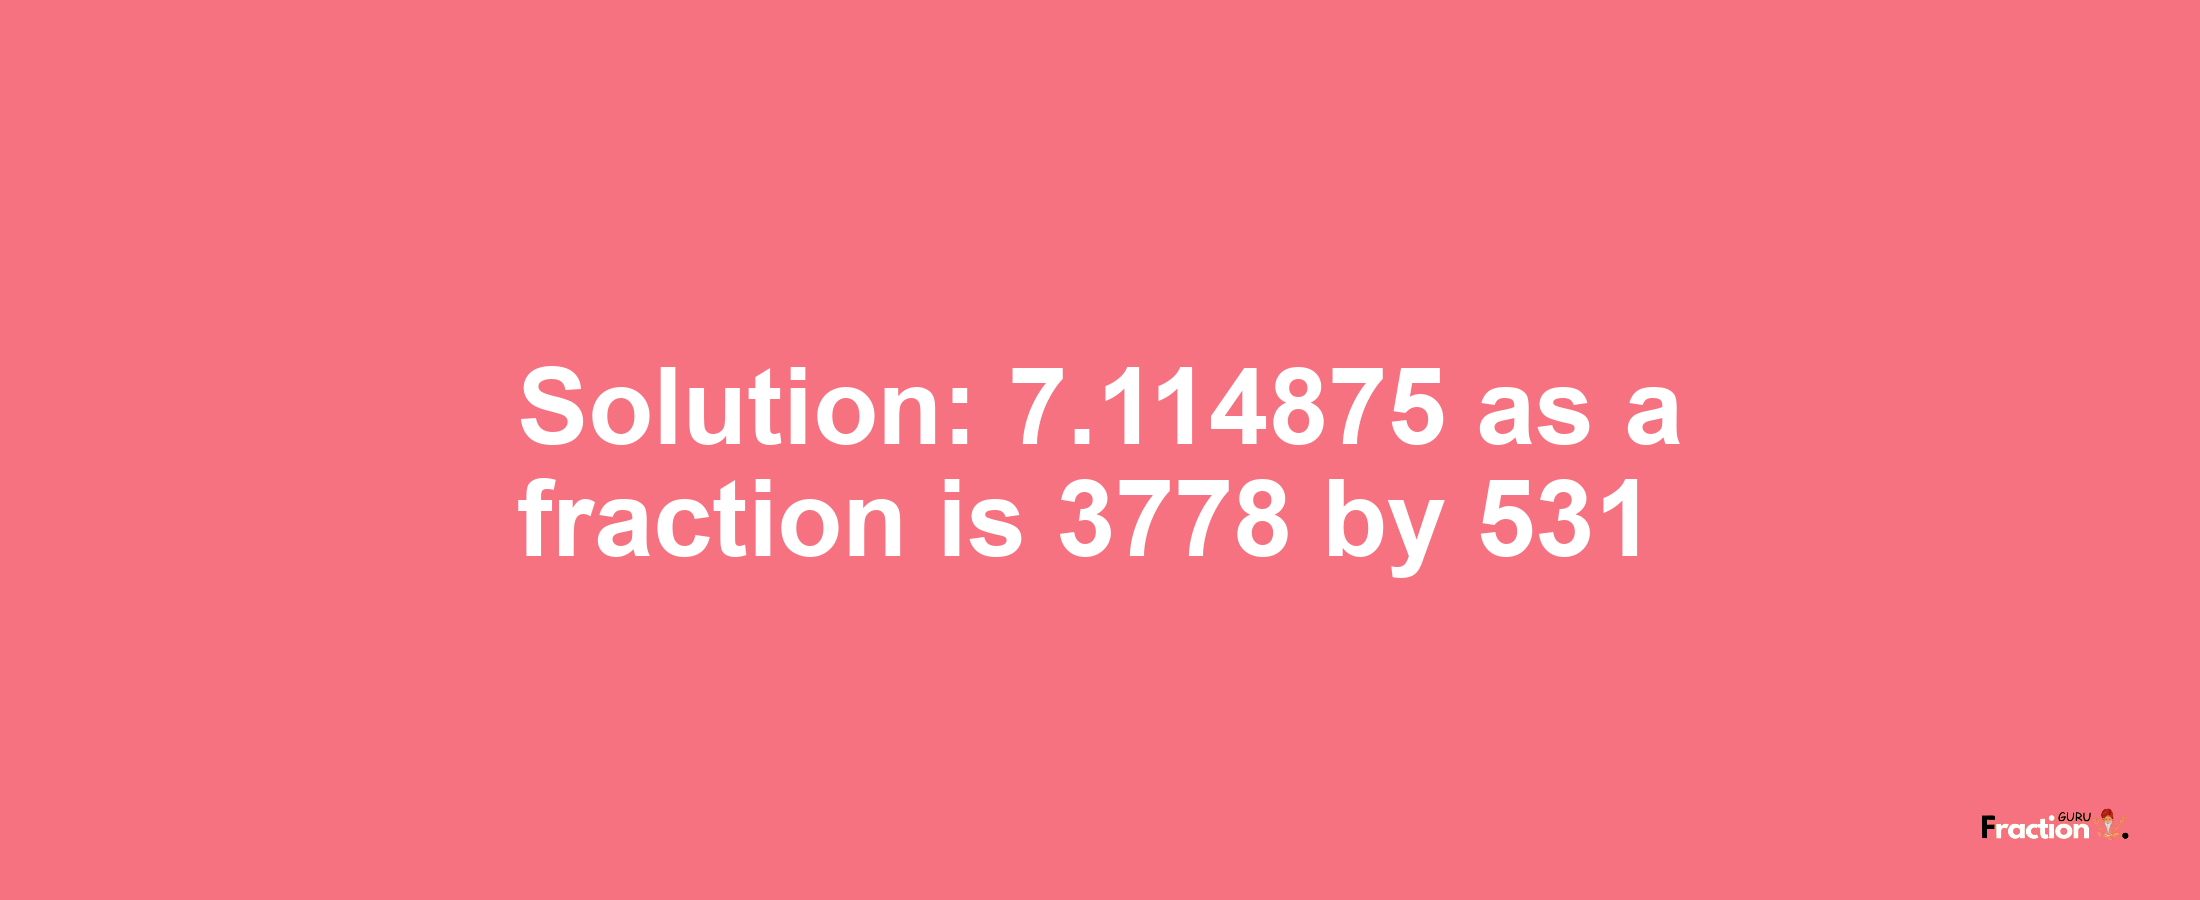 Solution:7.114875 as a fraction is 3778/531